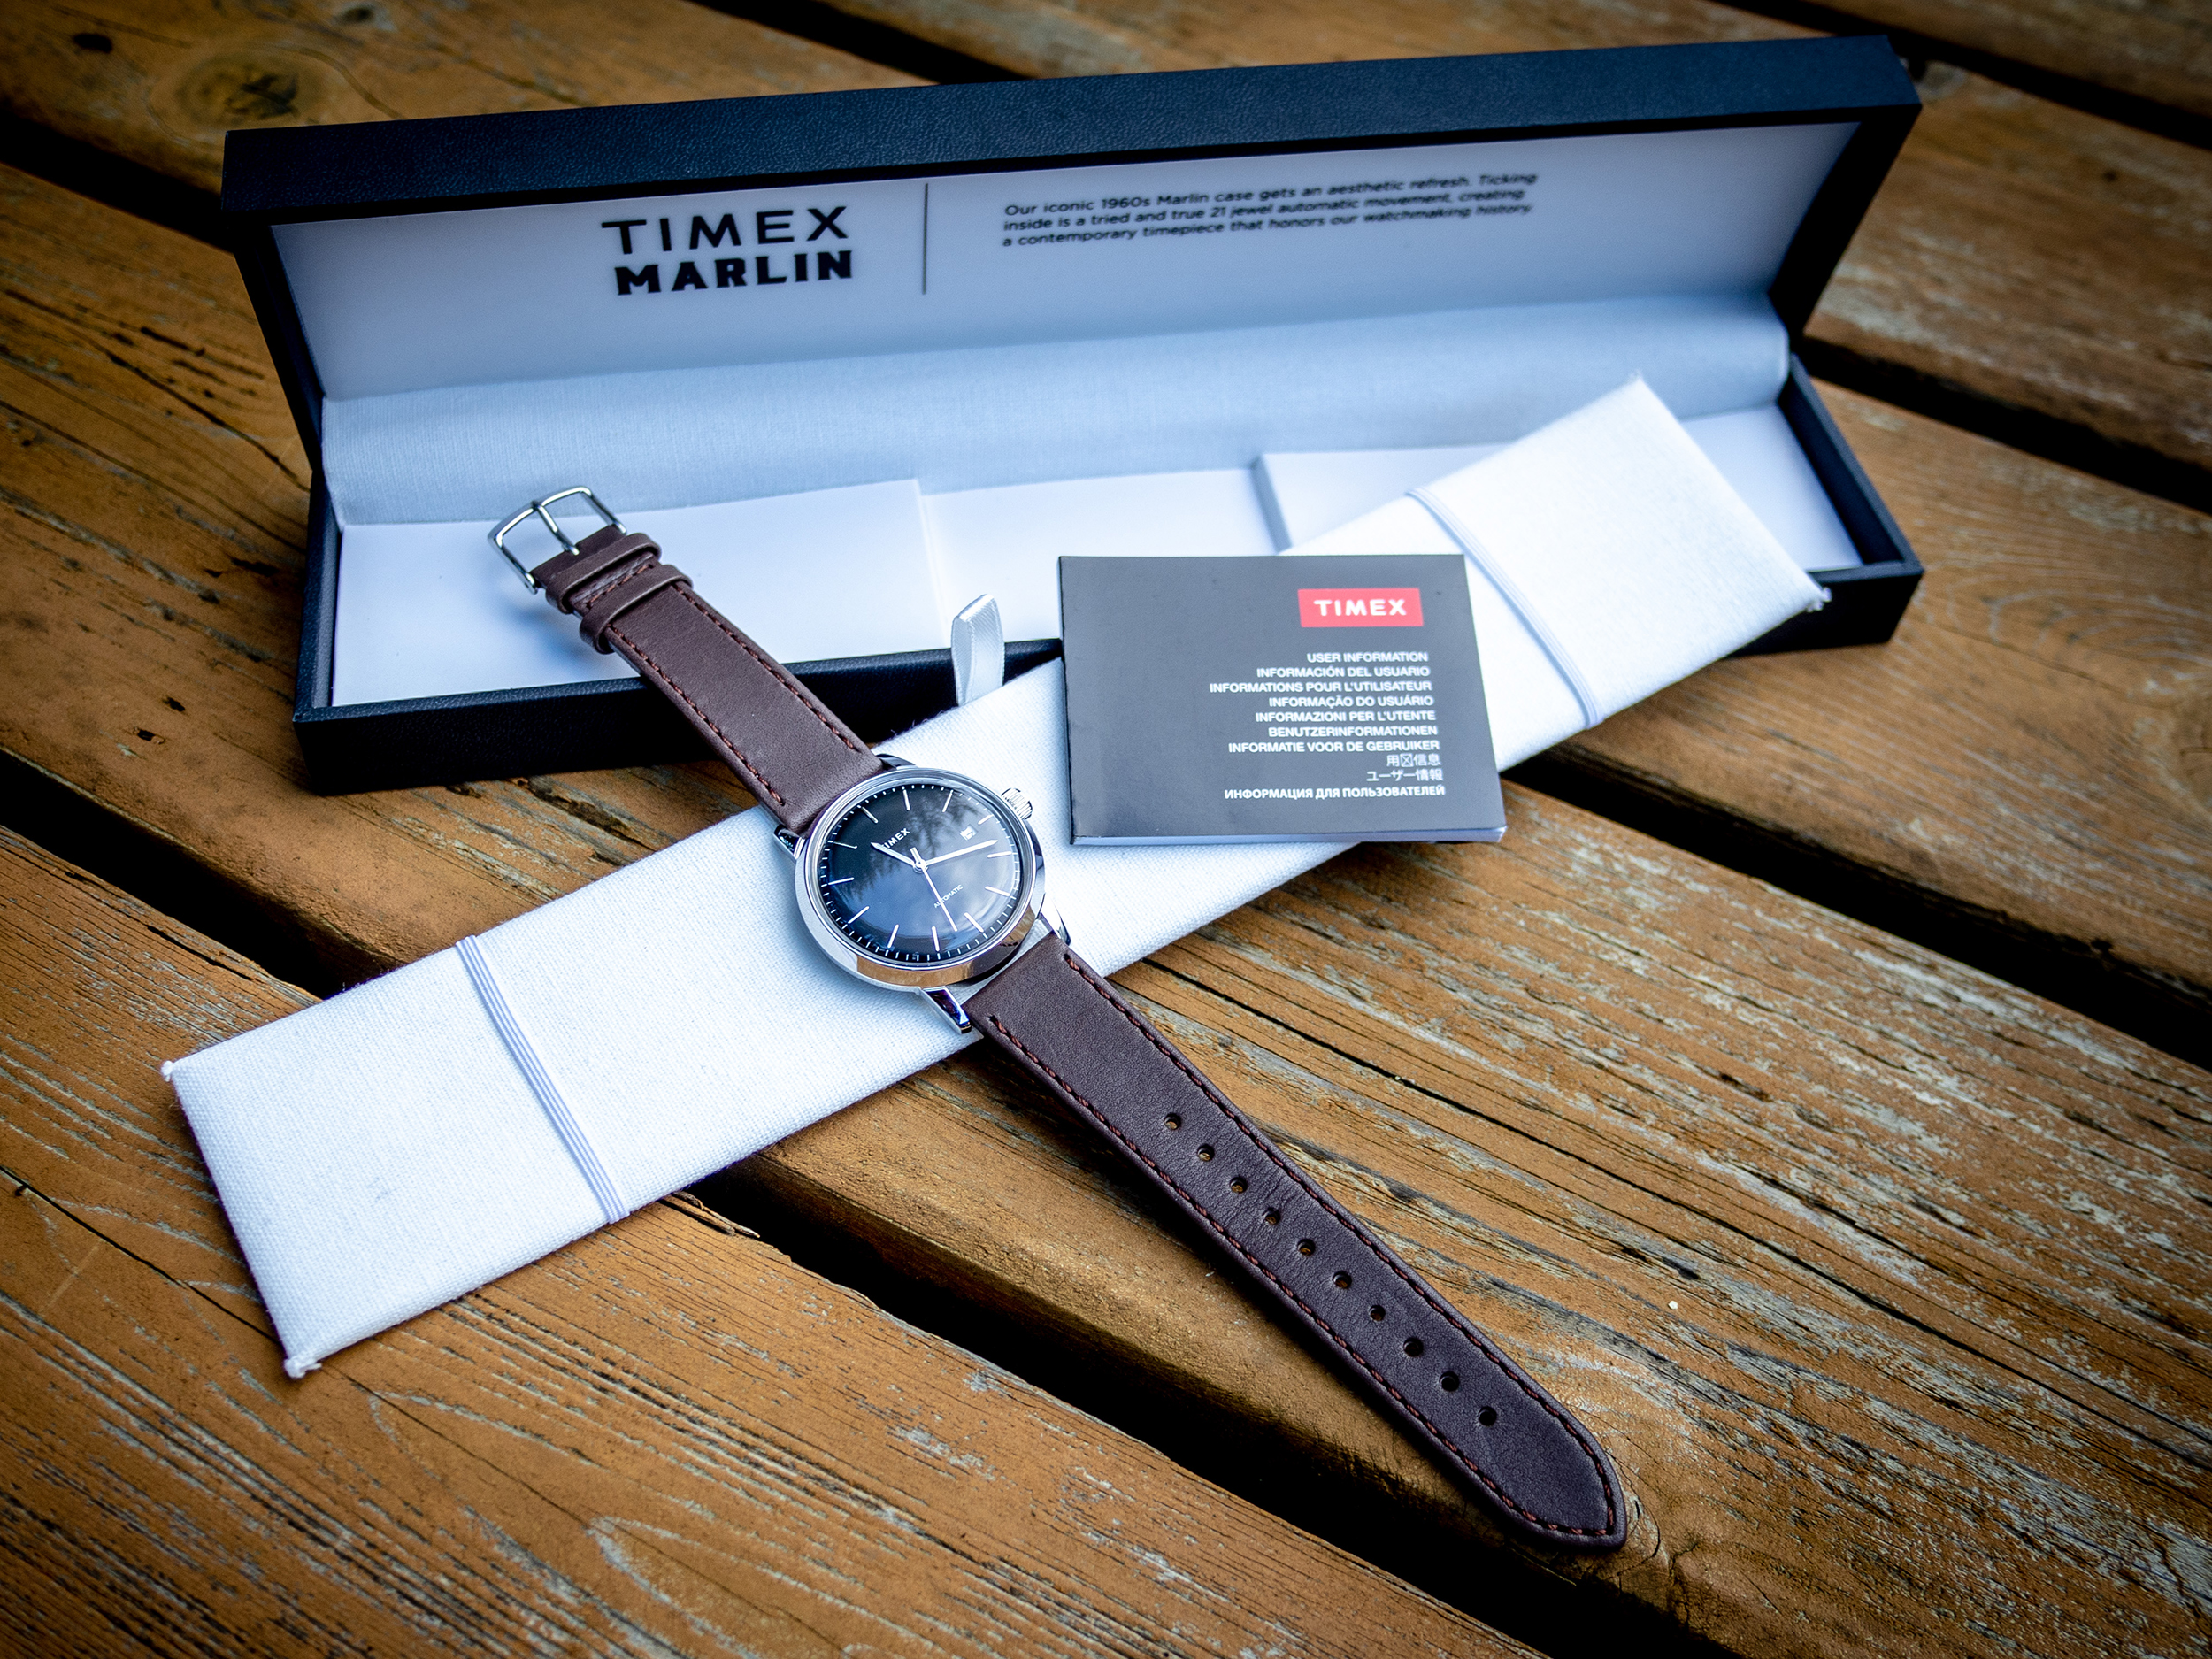 The Timex Marlin Automatic Watch